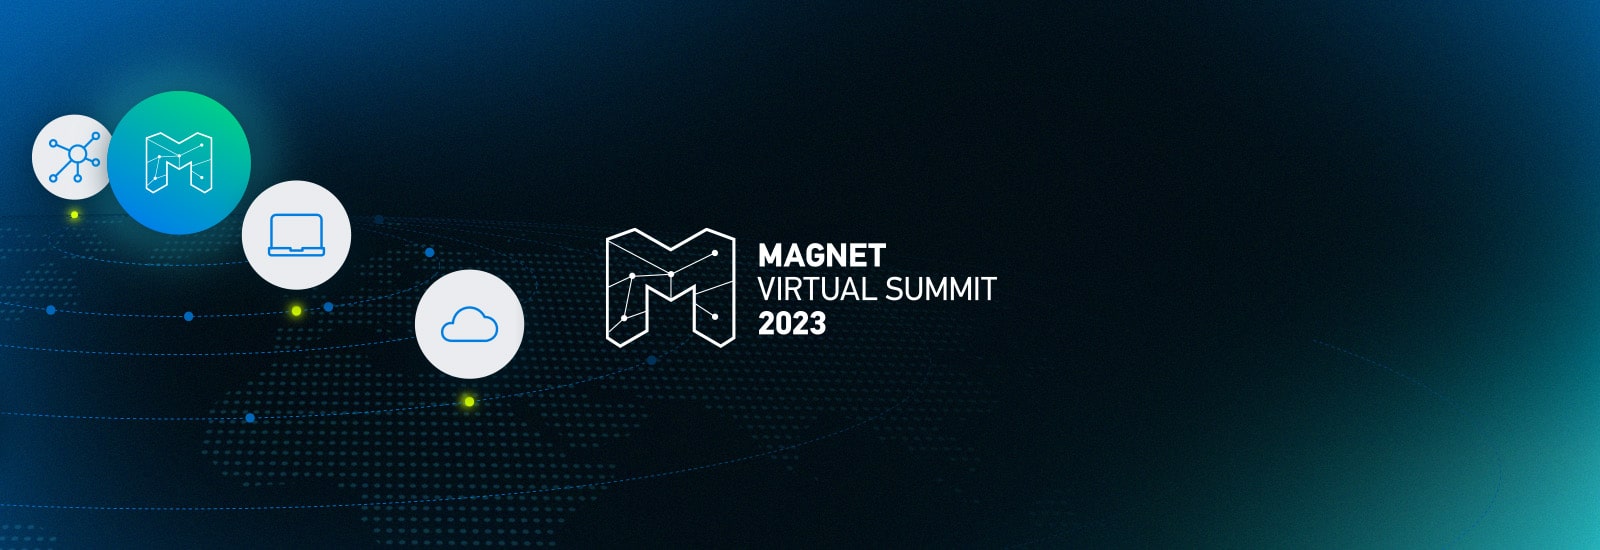 A decorative header for the Magnet Virtual Summit 2023 announcement